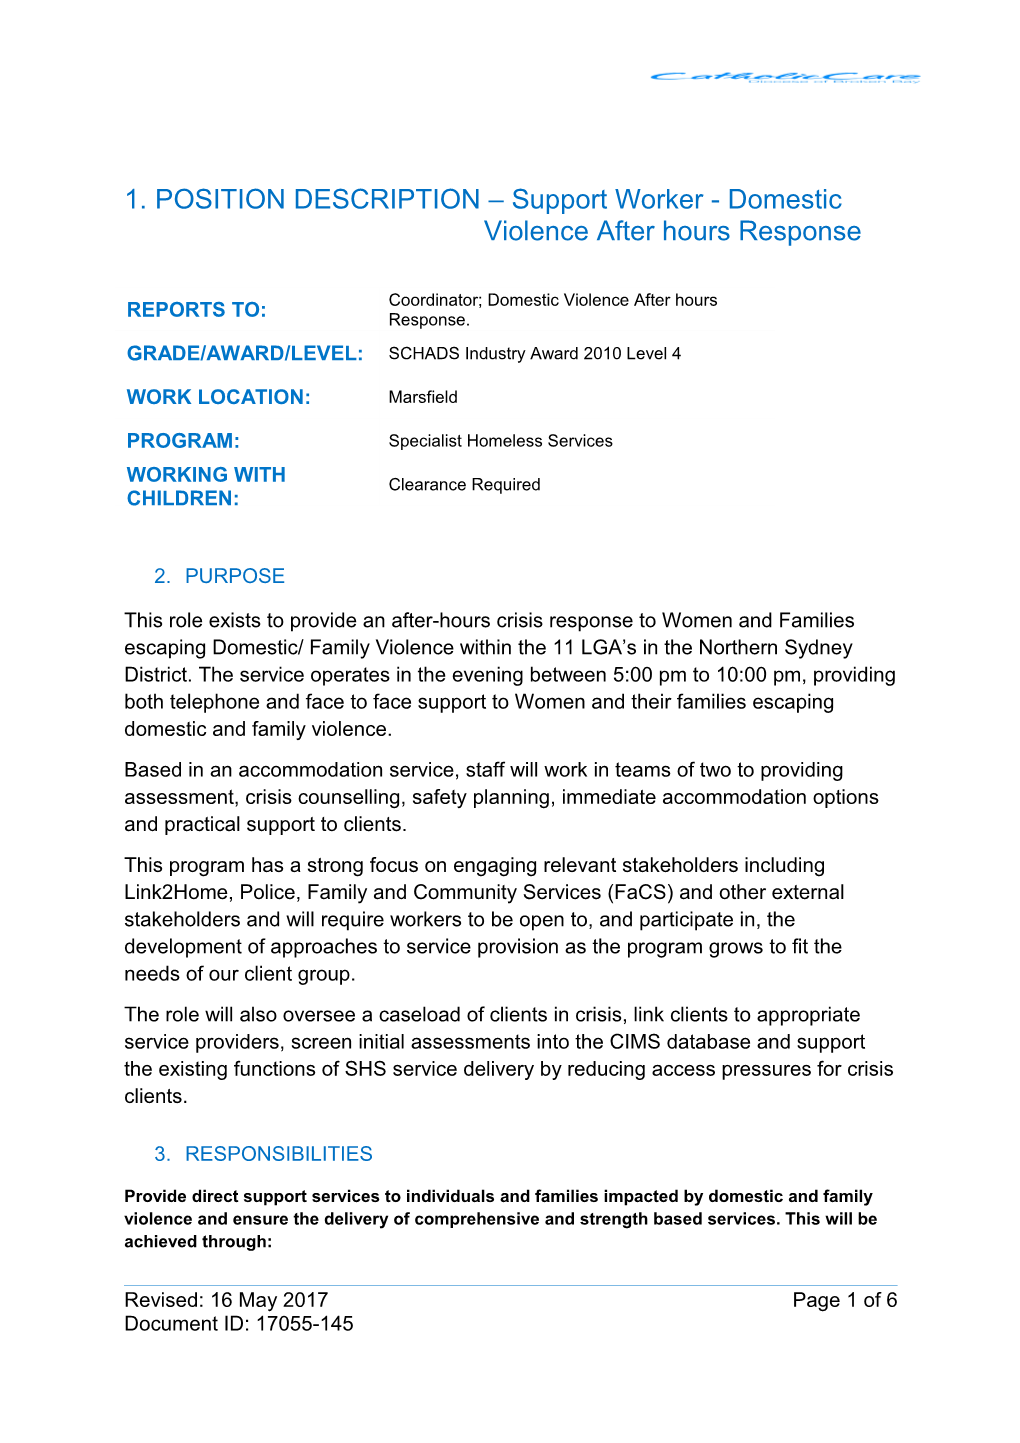 Support Worker Domestic Violence After Hours Response Team